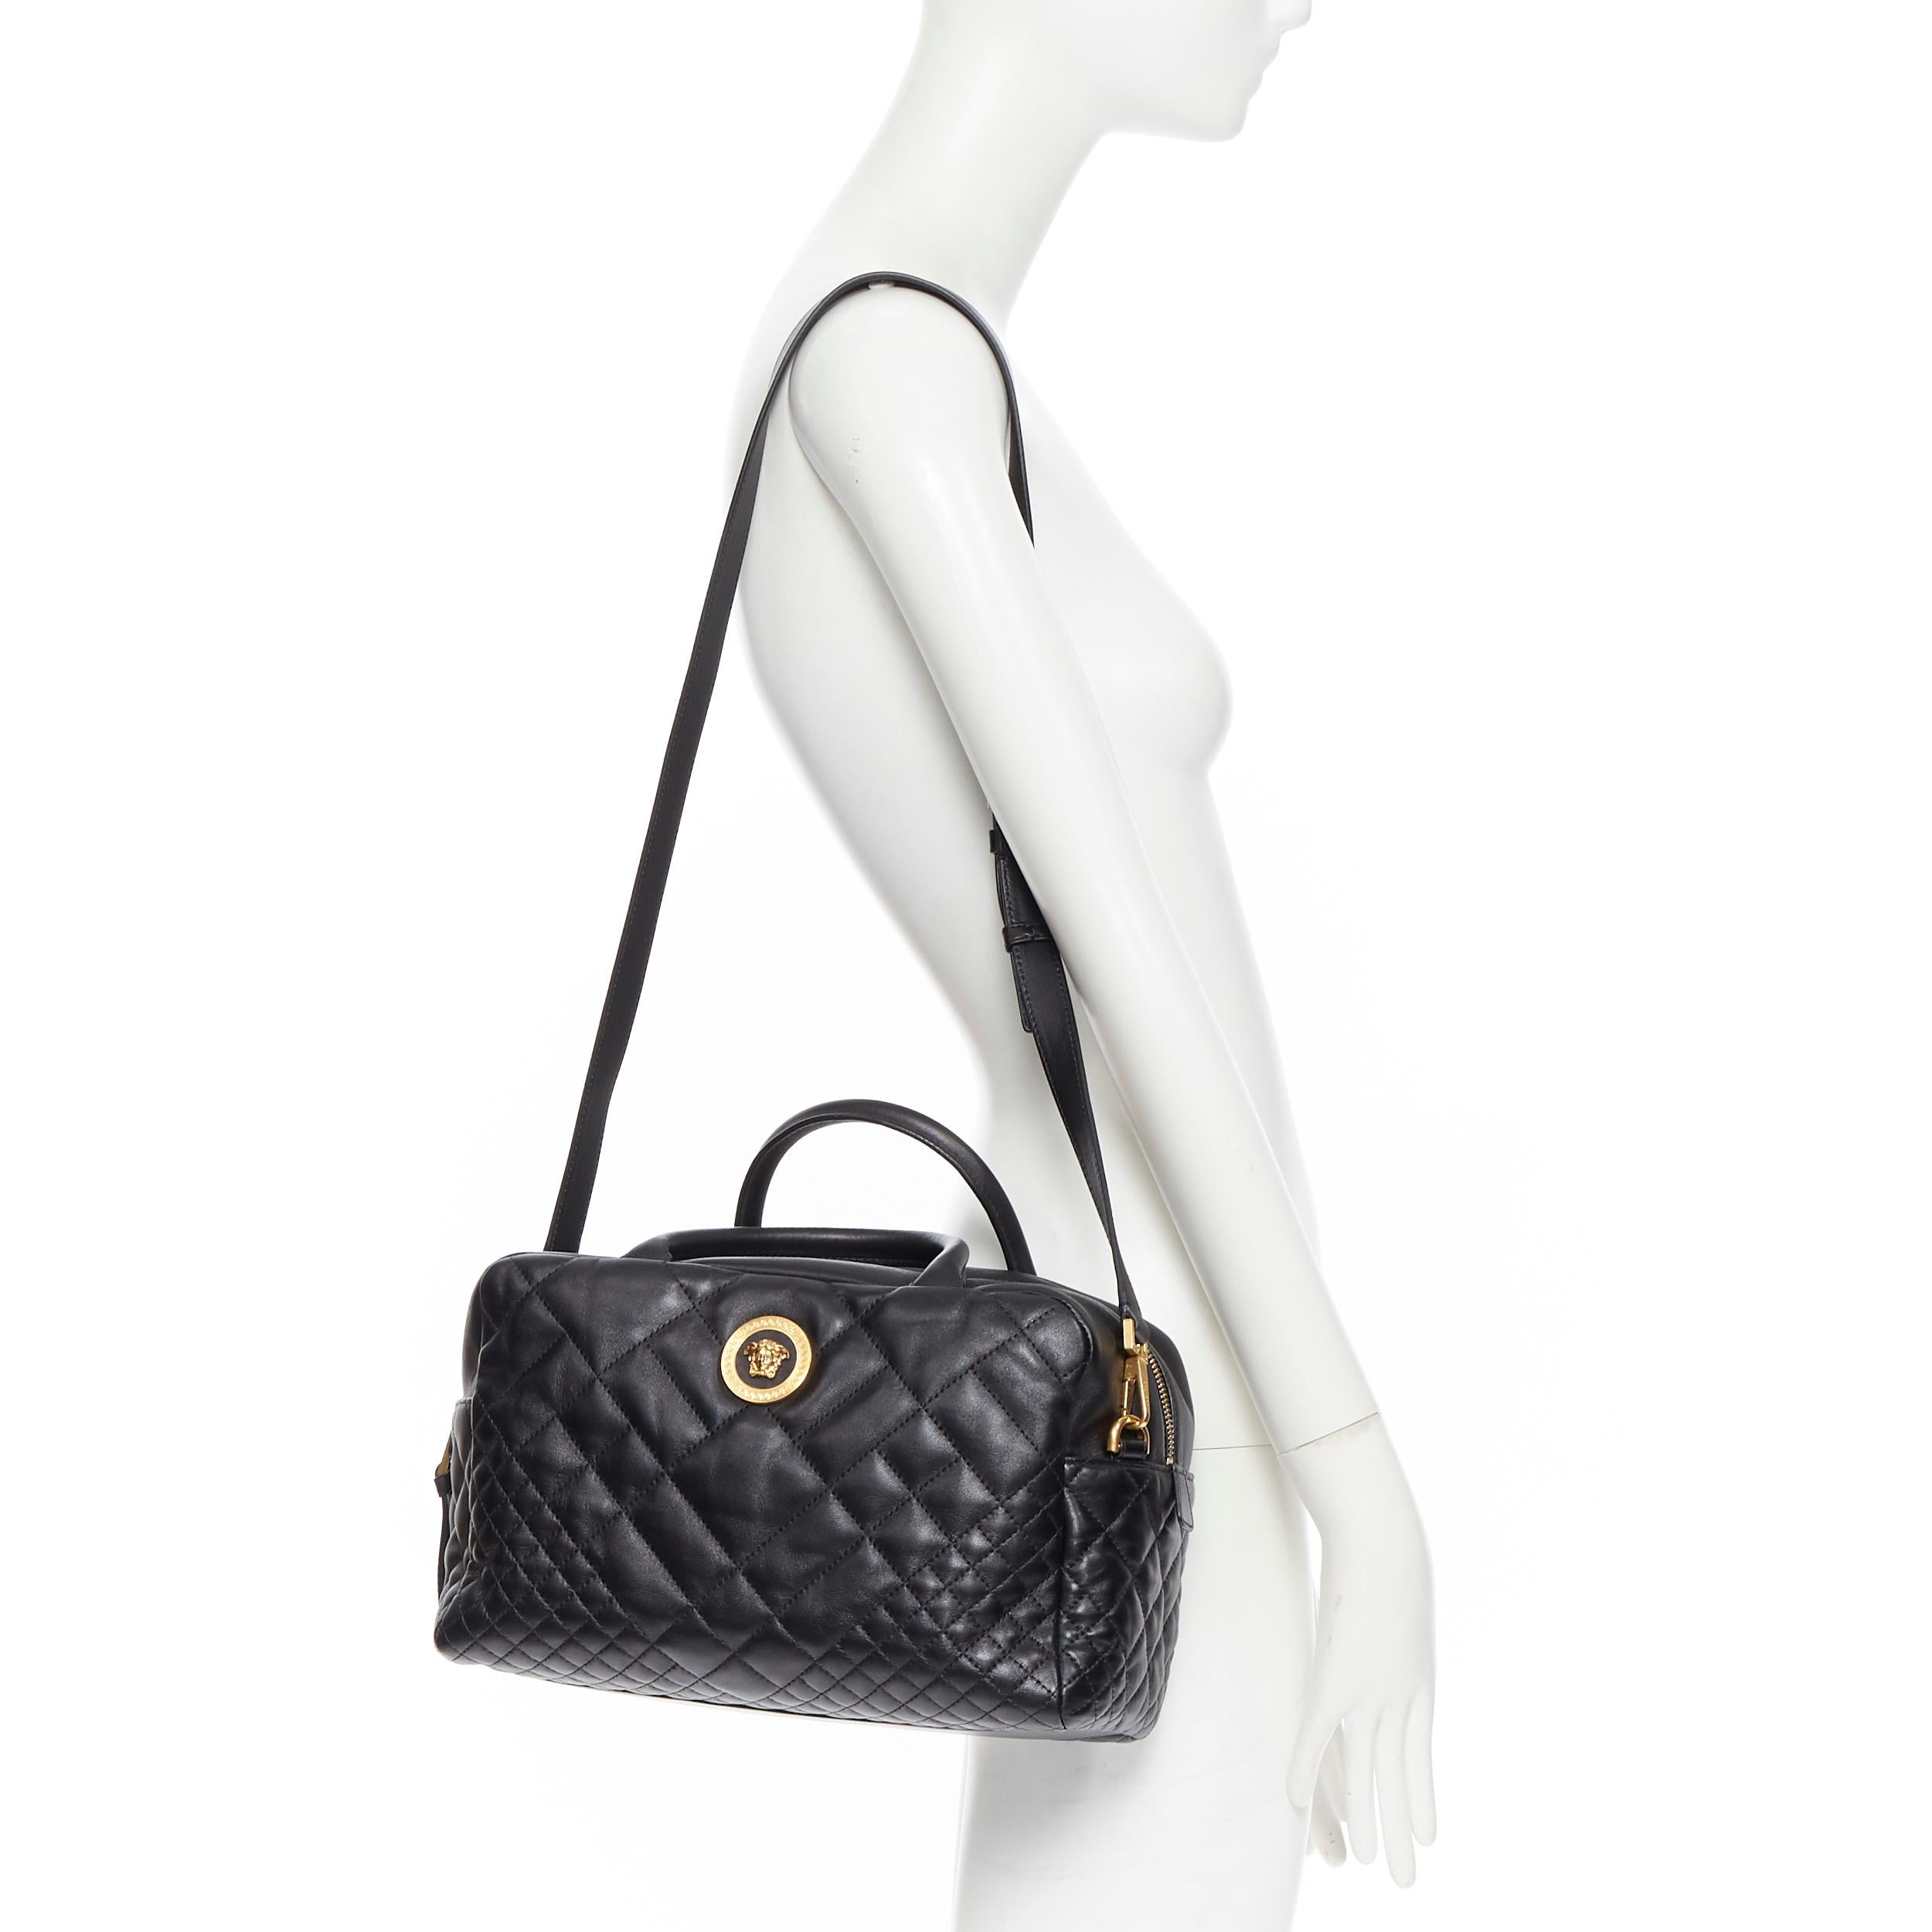 new VERSACE black diamond quilted lamb leather medusa large bowling bag satchel
Brand: Versace
Designer: Donatella Versace
Model Name / Style: Quilted satchel
Material: Leather; lamb
Color: Black
Pattern: Solid
Closure: Zip
Extra Detail: Nickel